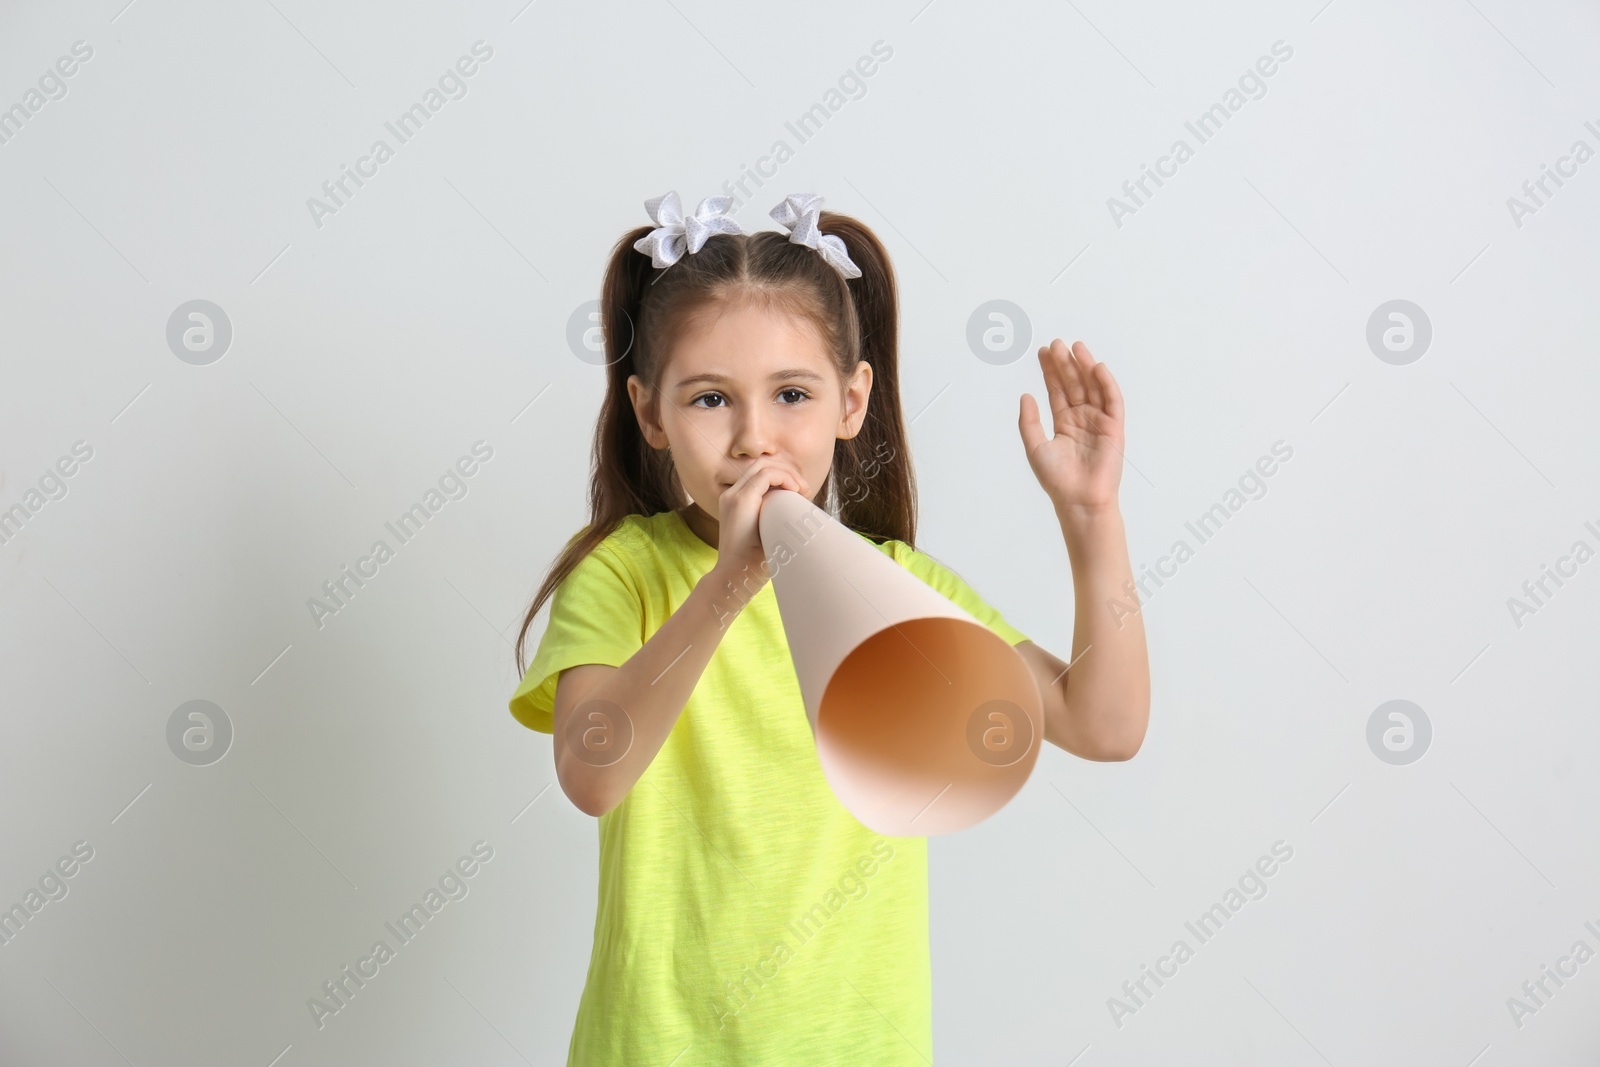 Photo of Cute little girl with paper megaphone on white background